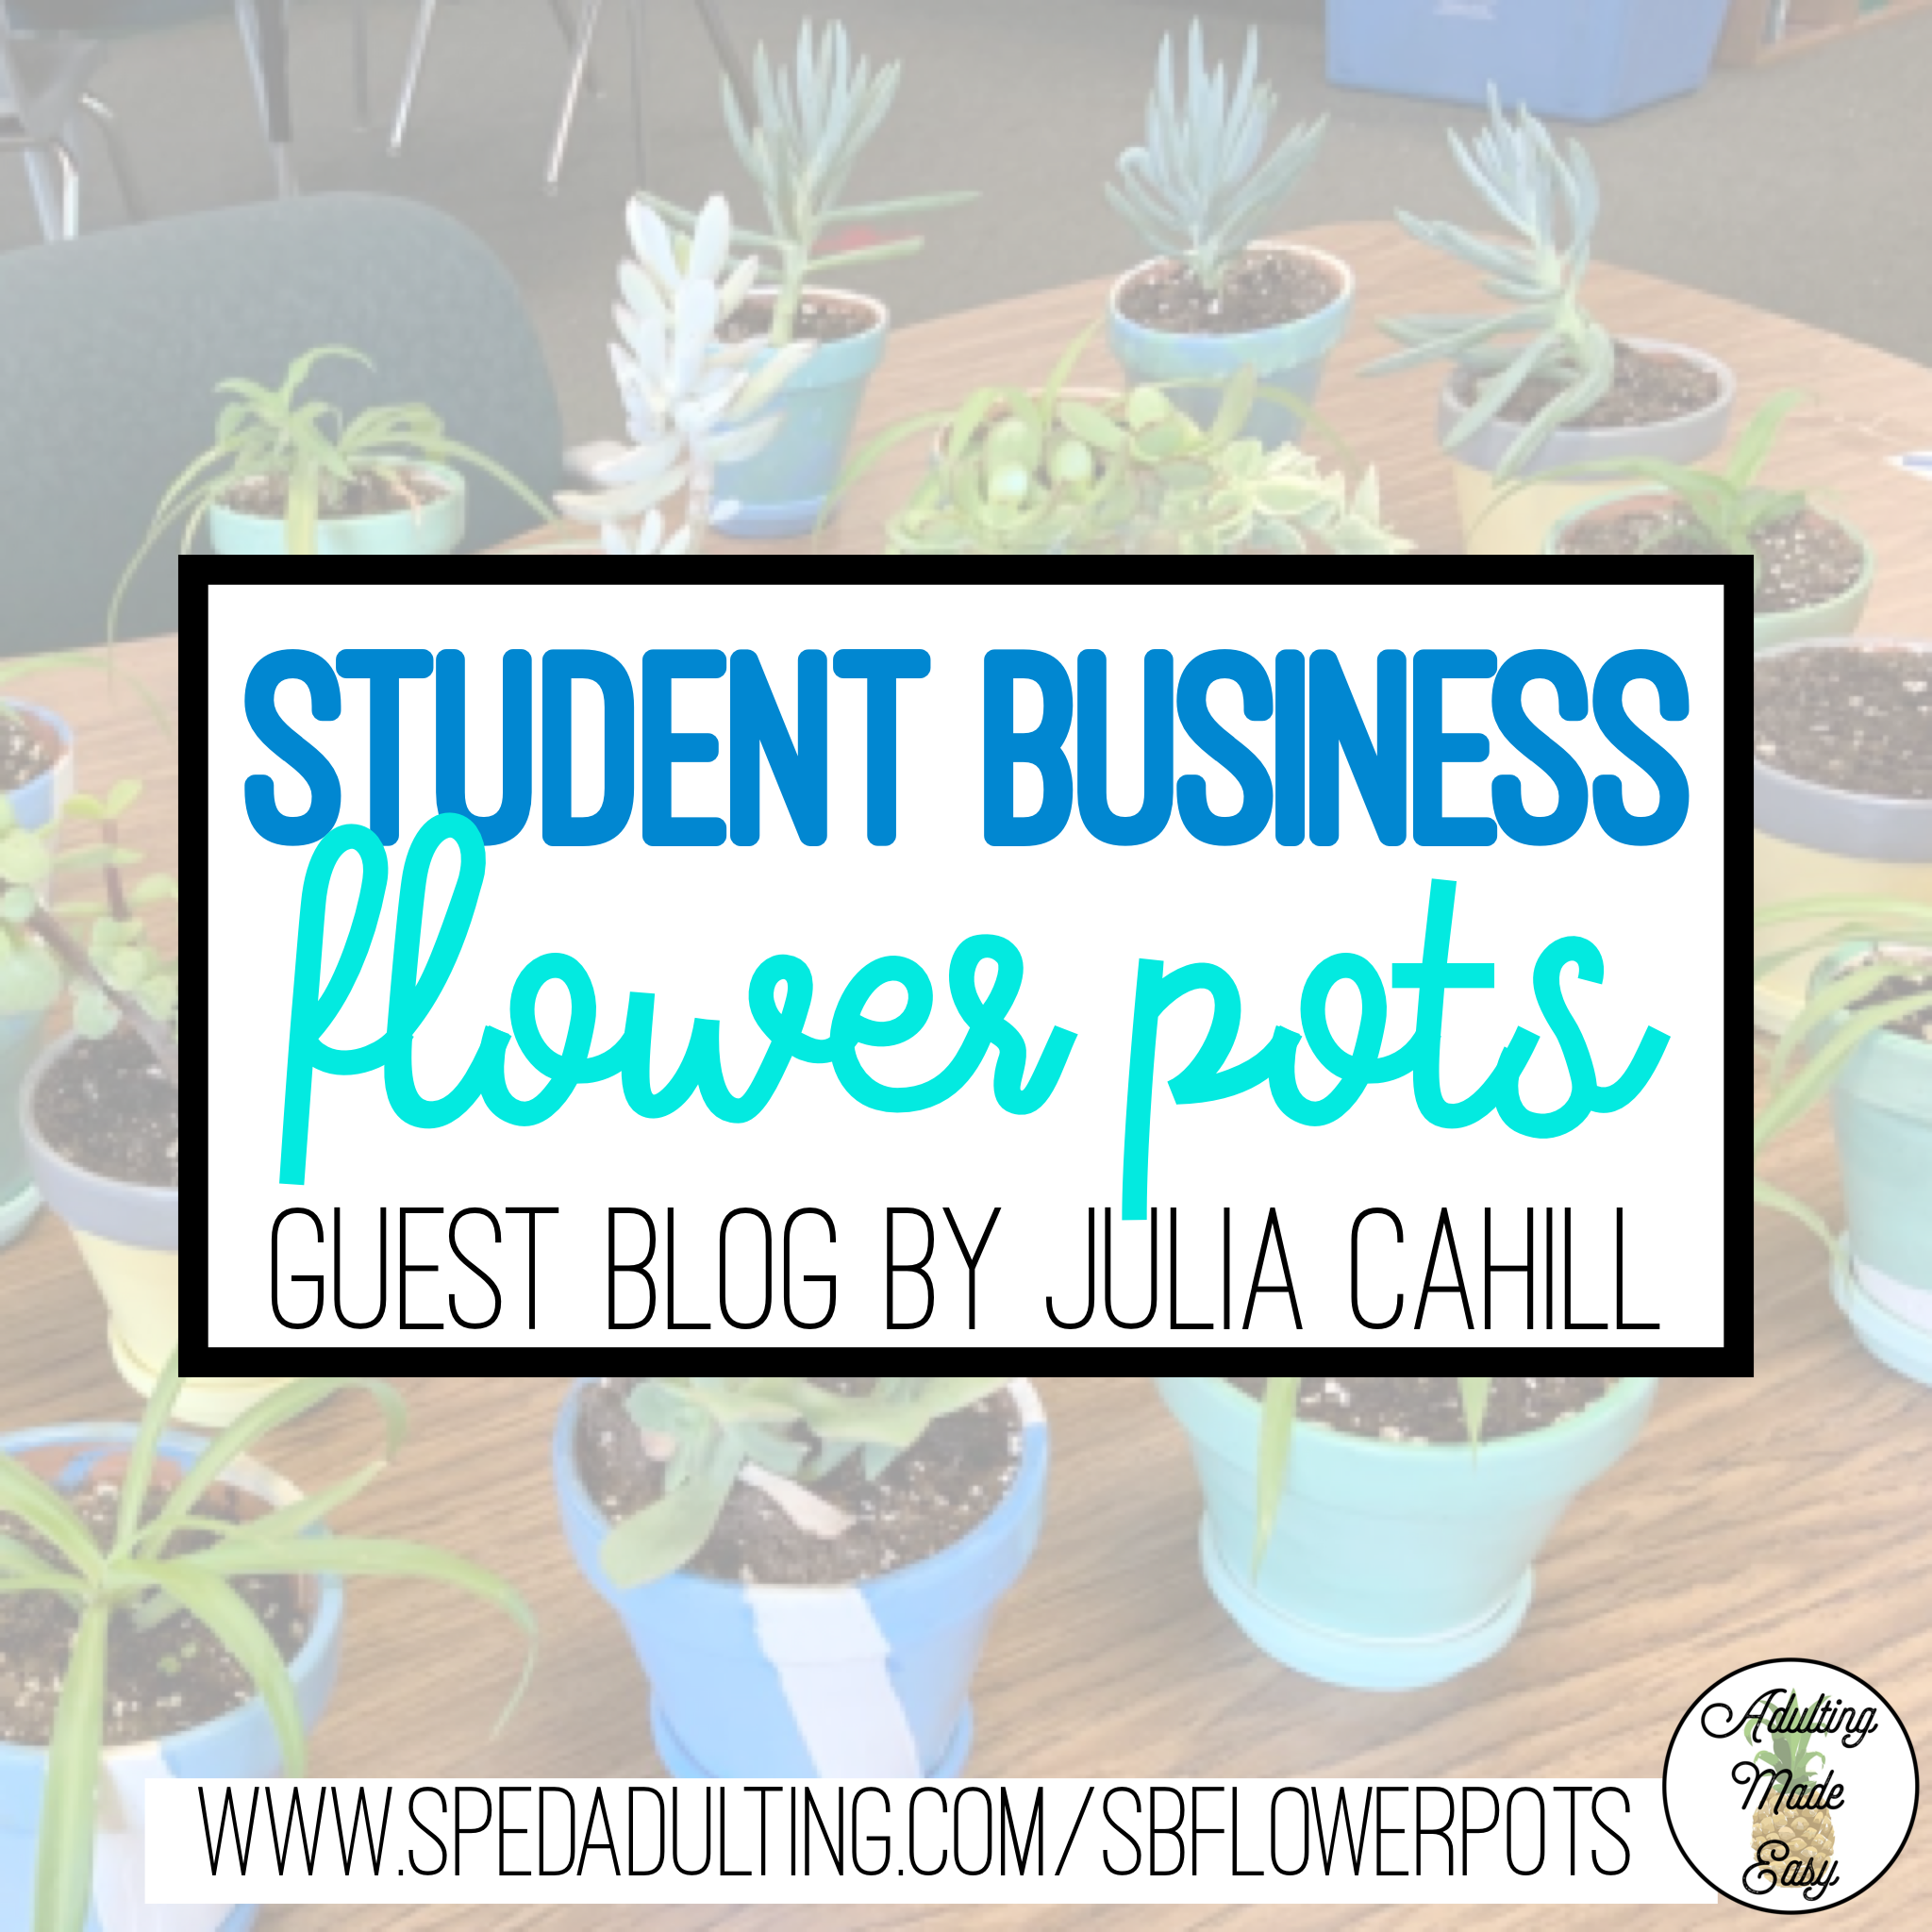 BLOG: Classroom Student Business for special education: Flower Pots